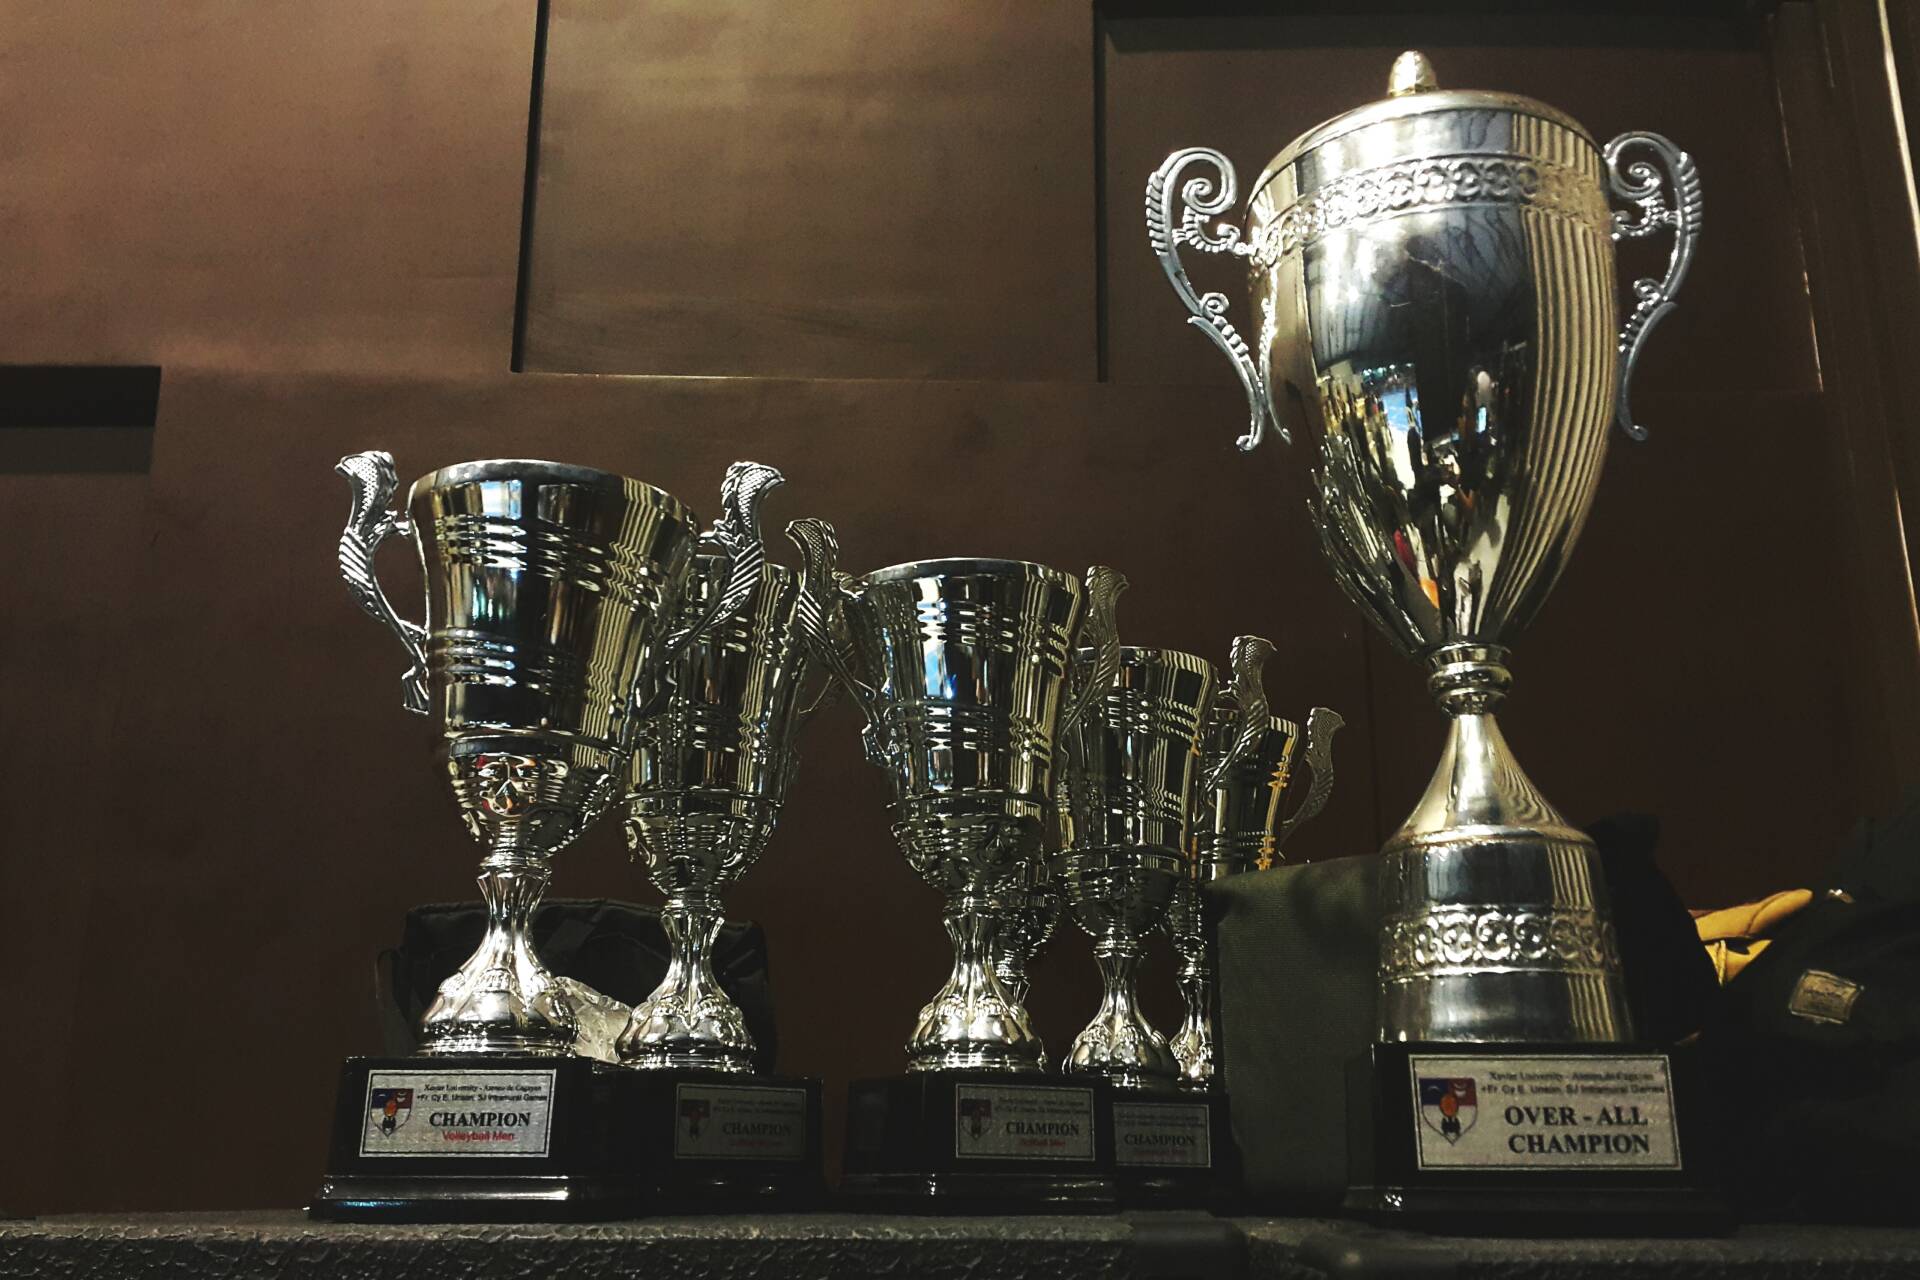 Several trophies against a dark background